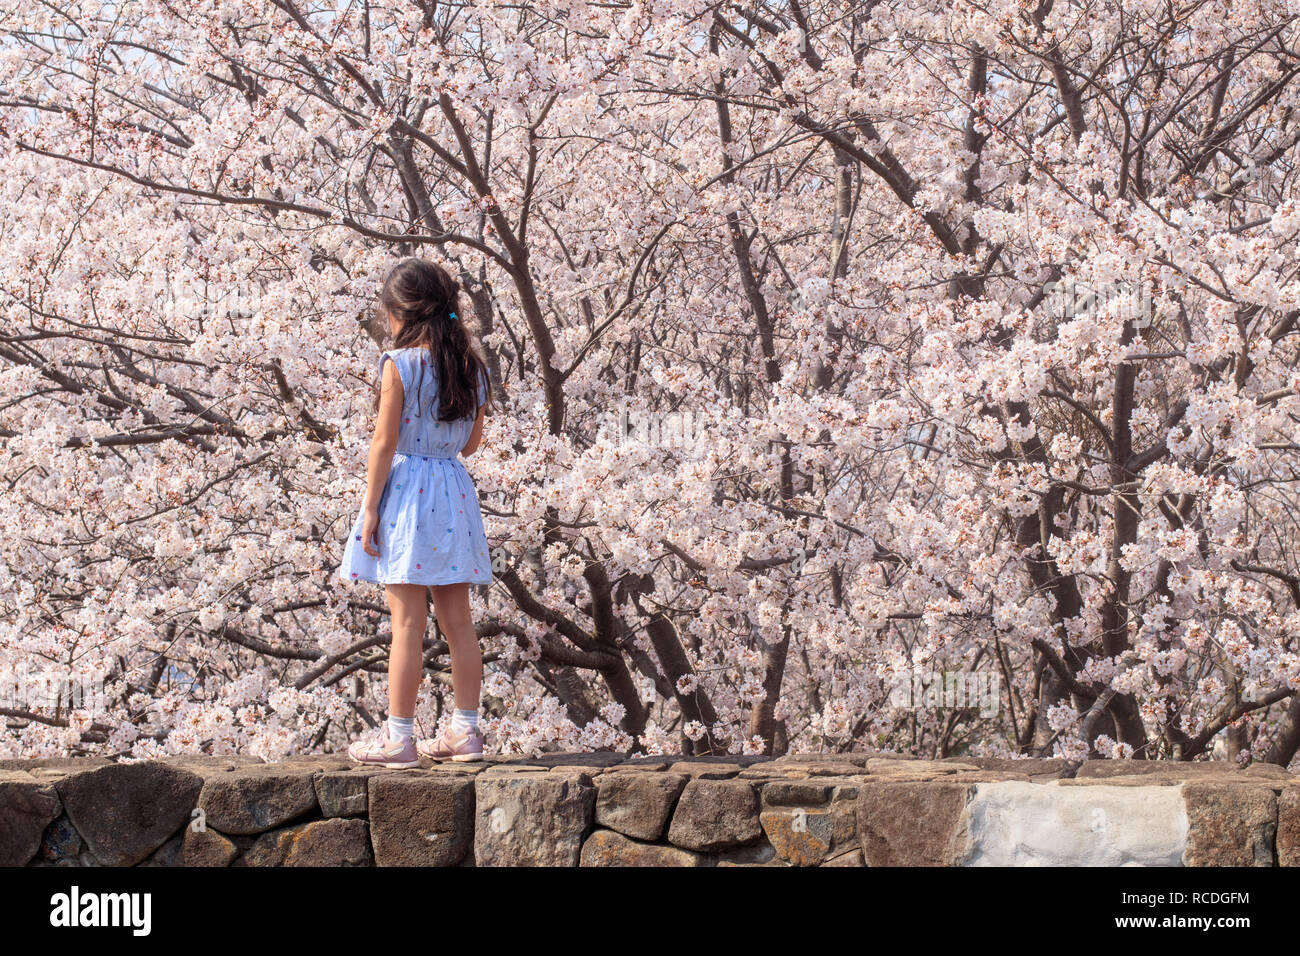 young girl walking on a rock wall in front of cherry blossoms Stock Photo